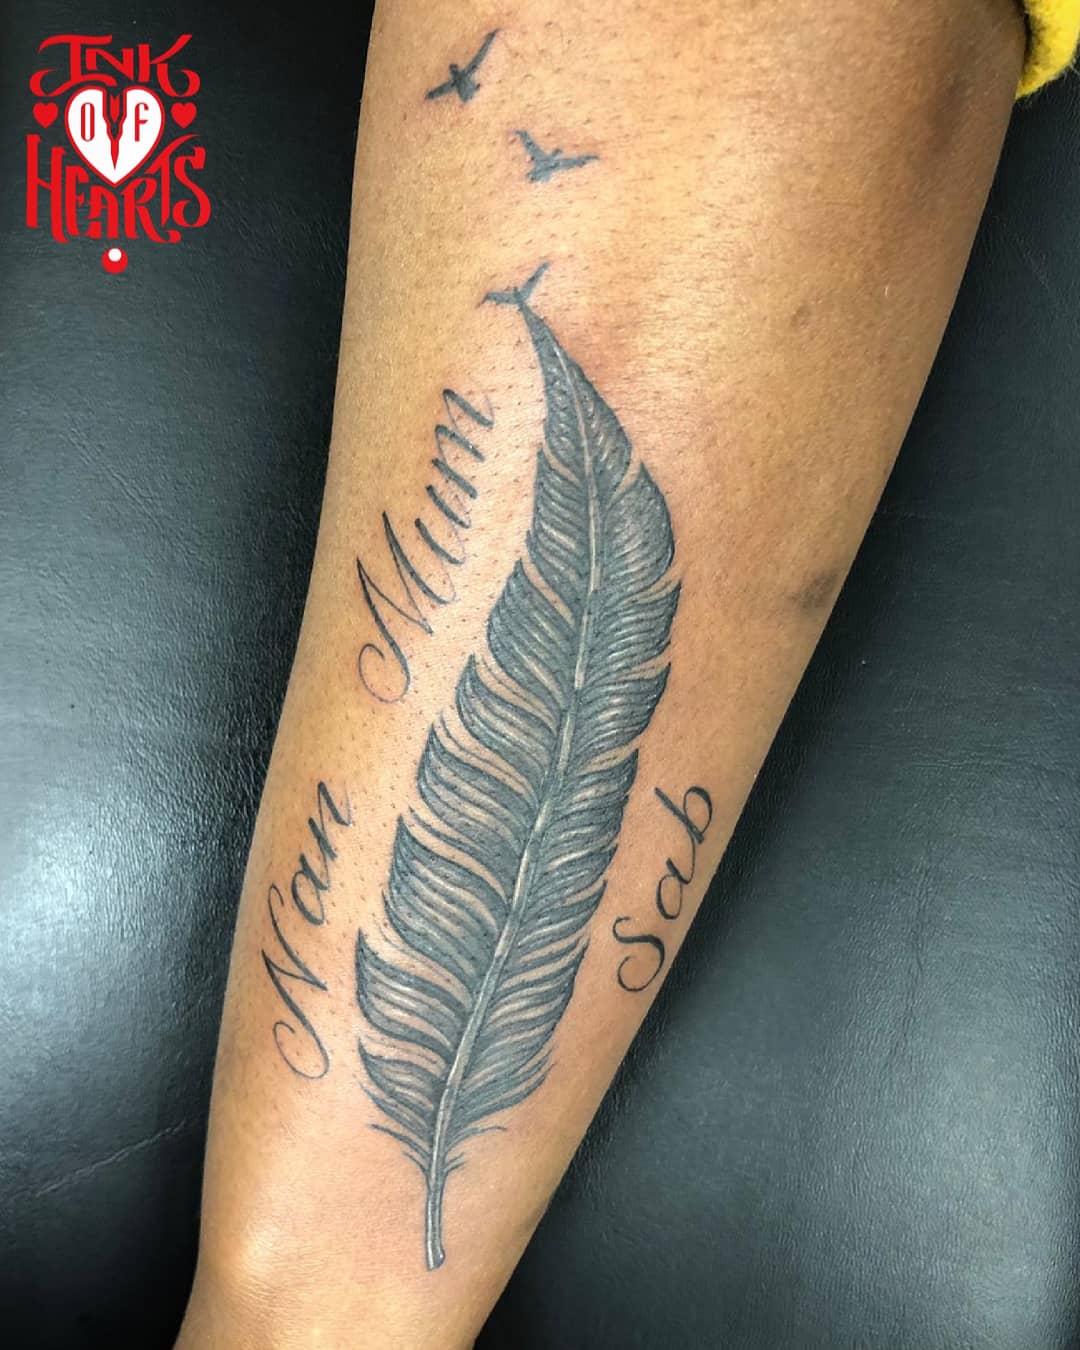 Ink Of Hearts Tattoos on Twitter The feather of hope  Tattoo cover up by  SimonSaysInk Feather FeatherTattoo CoverUp CoverUpTattoo TattooCoverUp  httpstcoSx2LTXL13N  Twitter